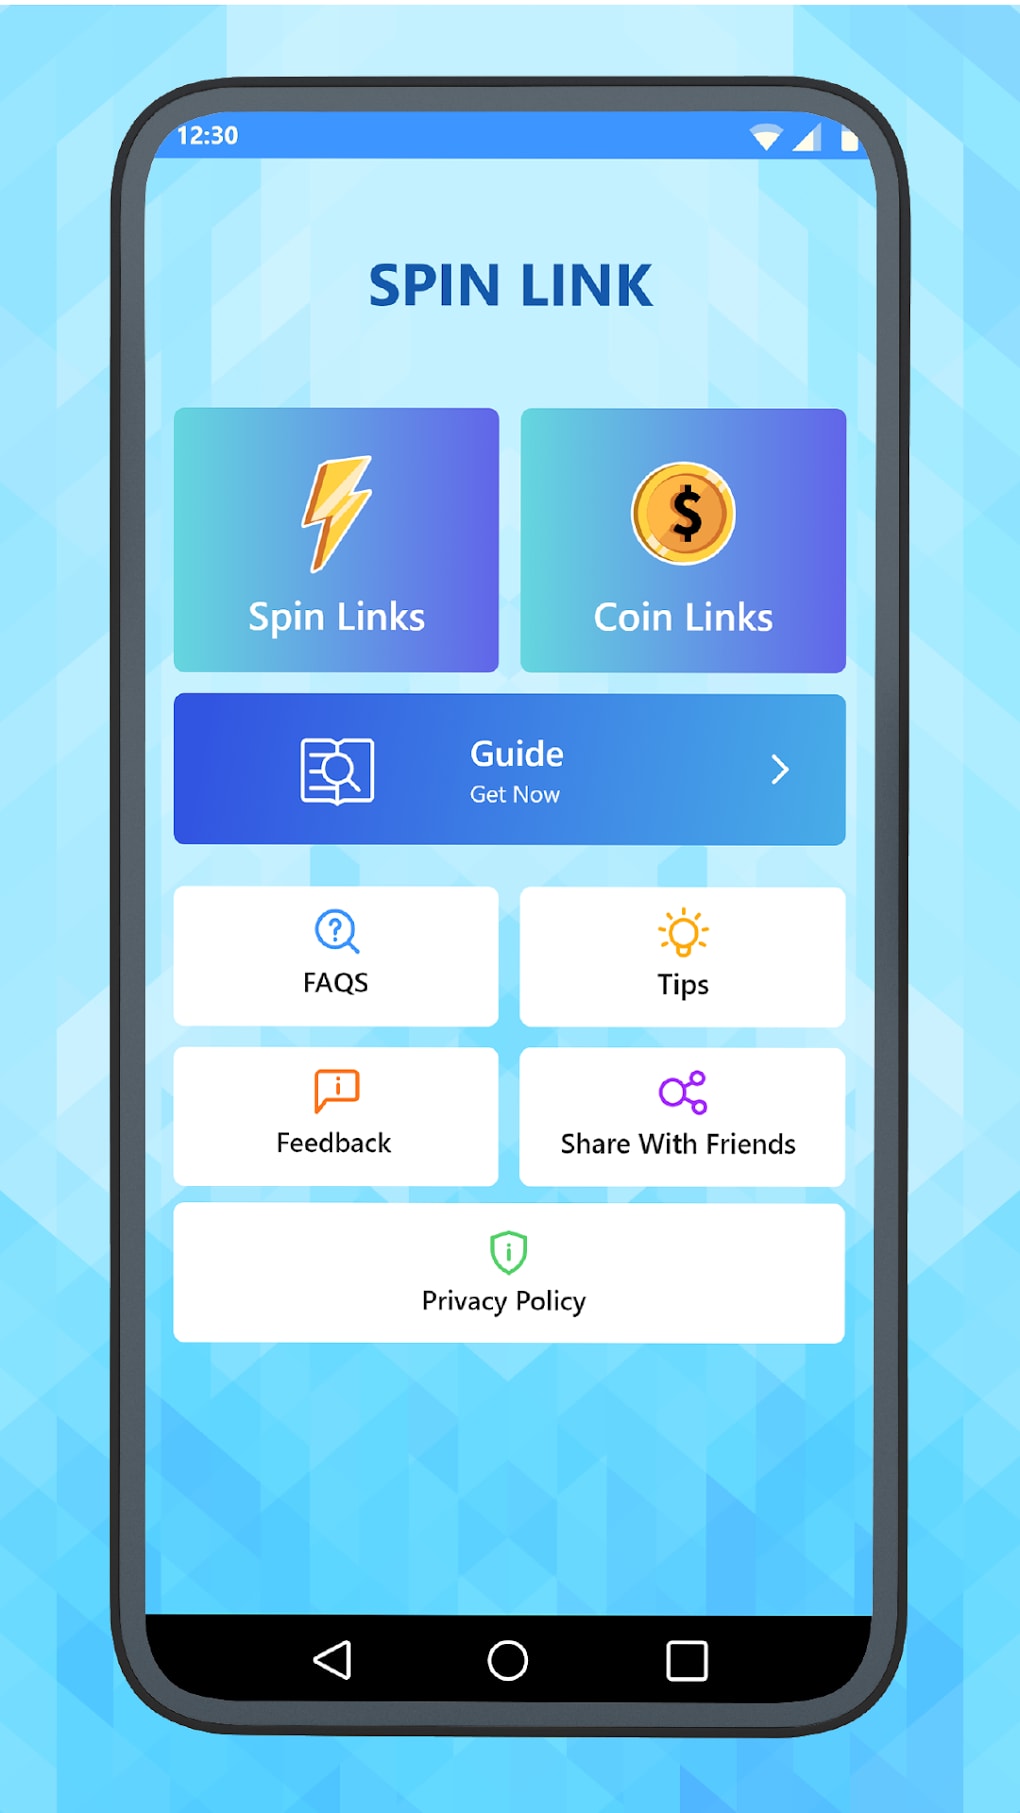 Spin link. Link Coin. Chatspin скрин запретки.